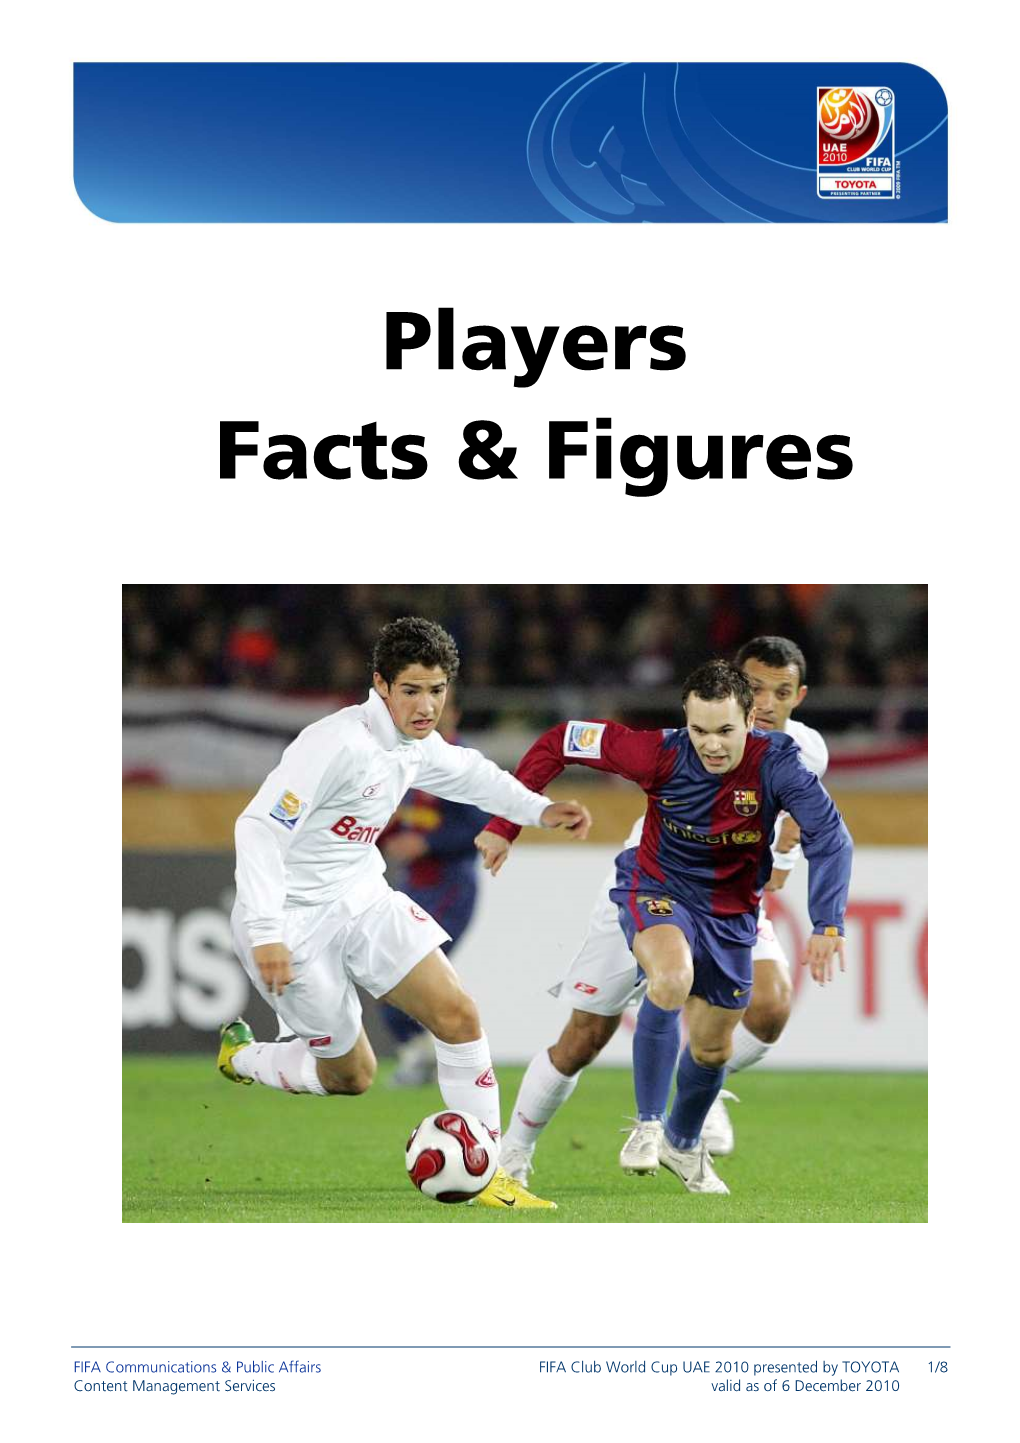 Players Facts & Figures